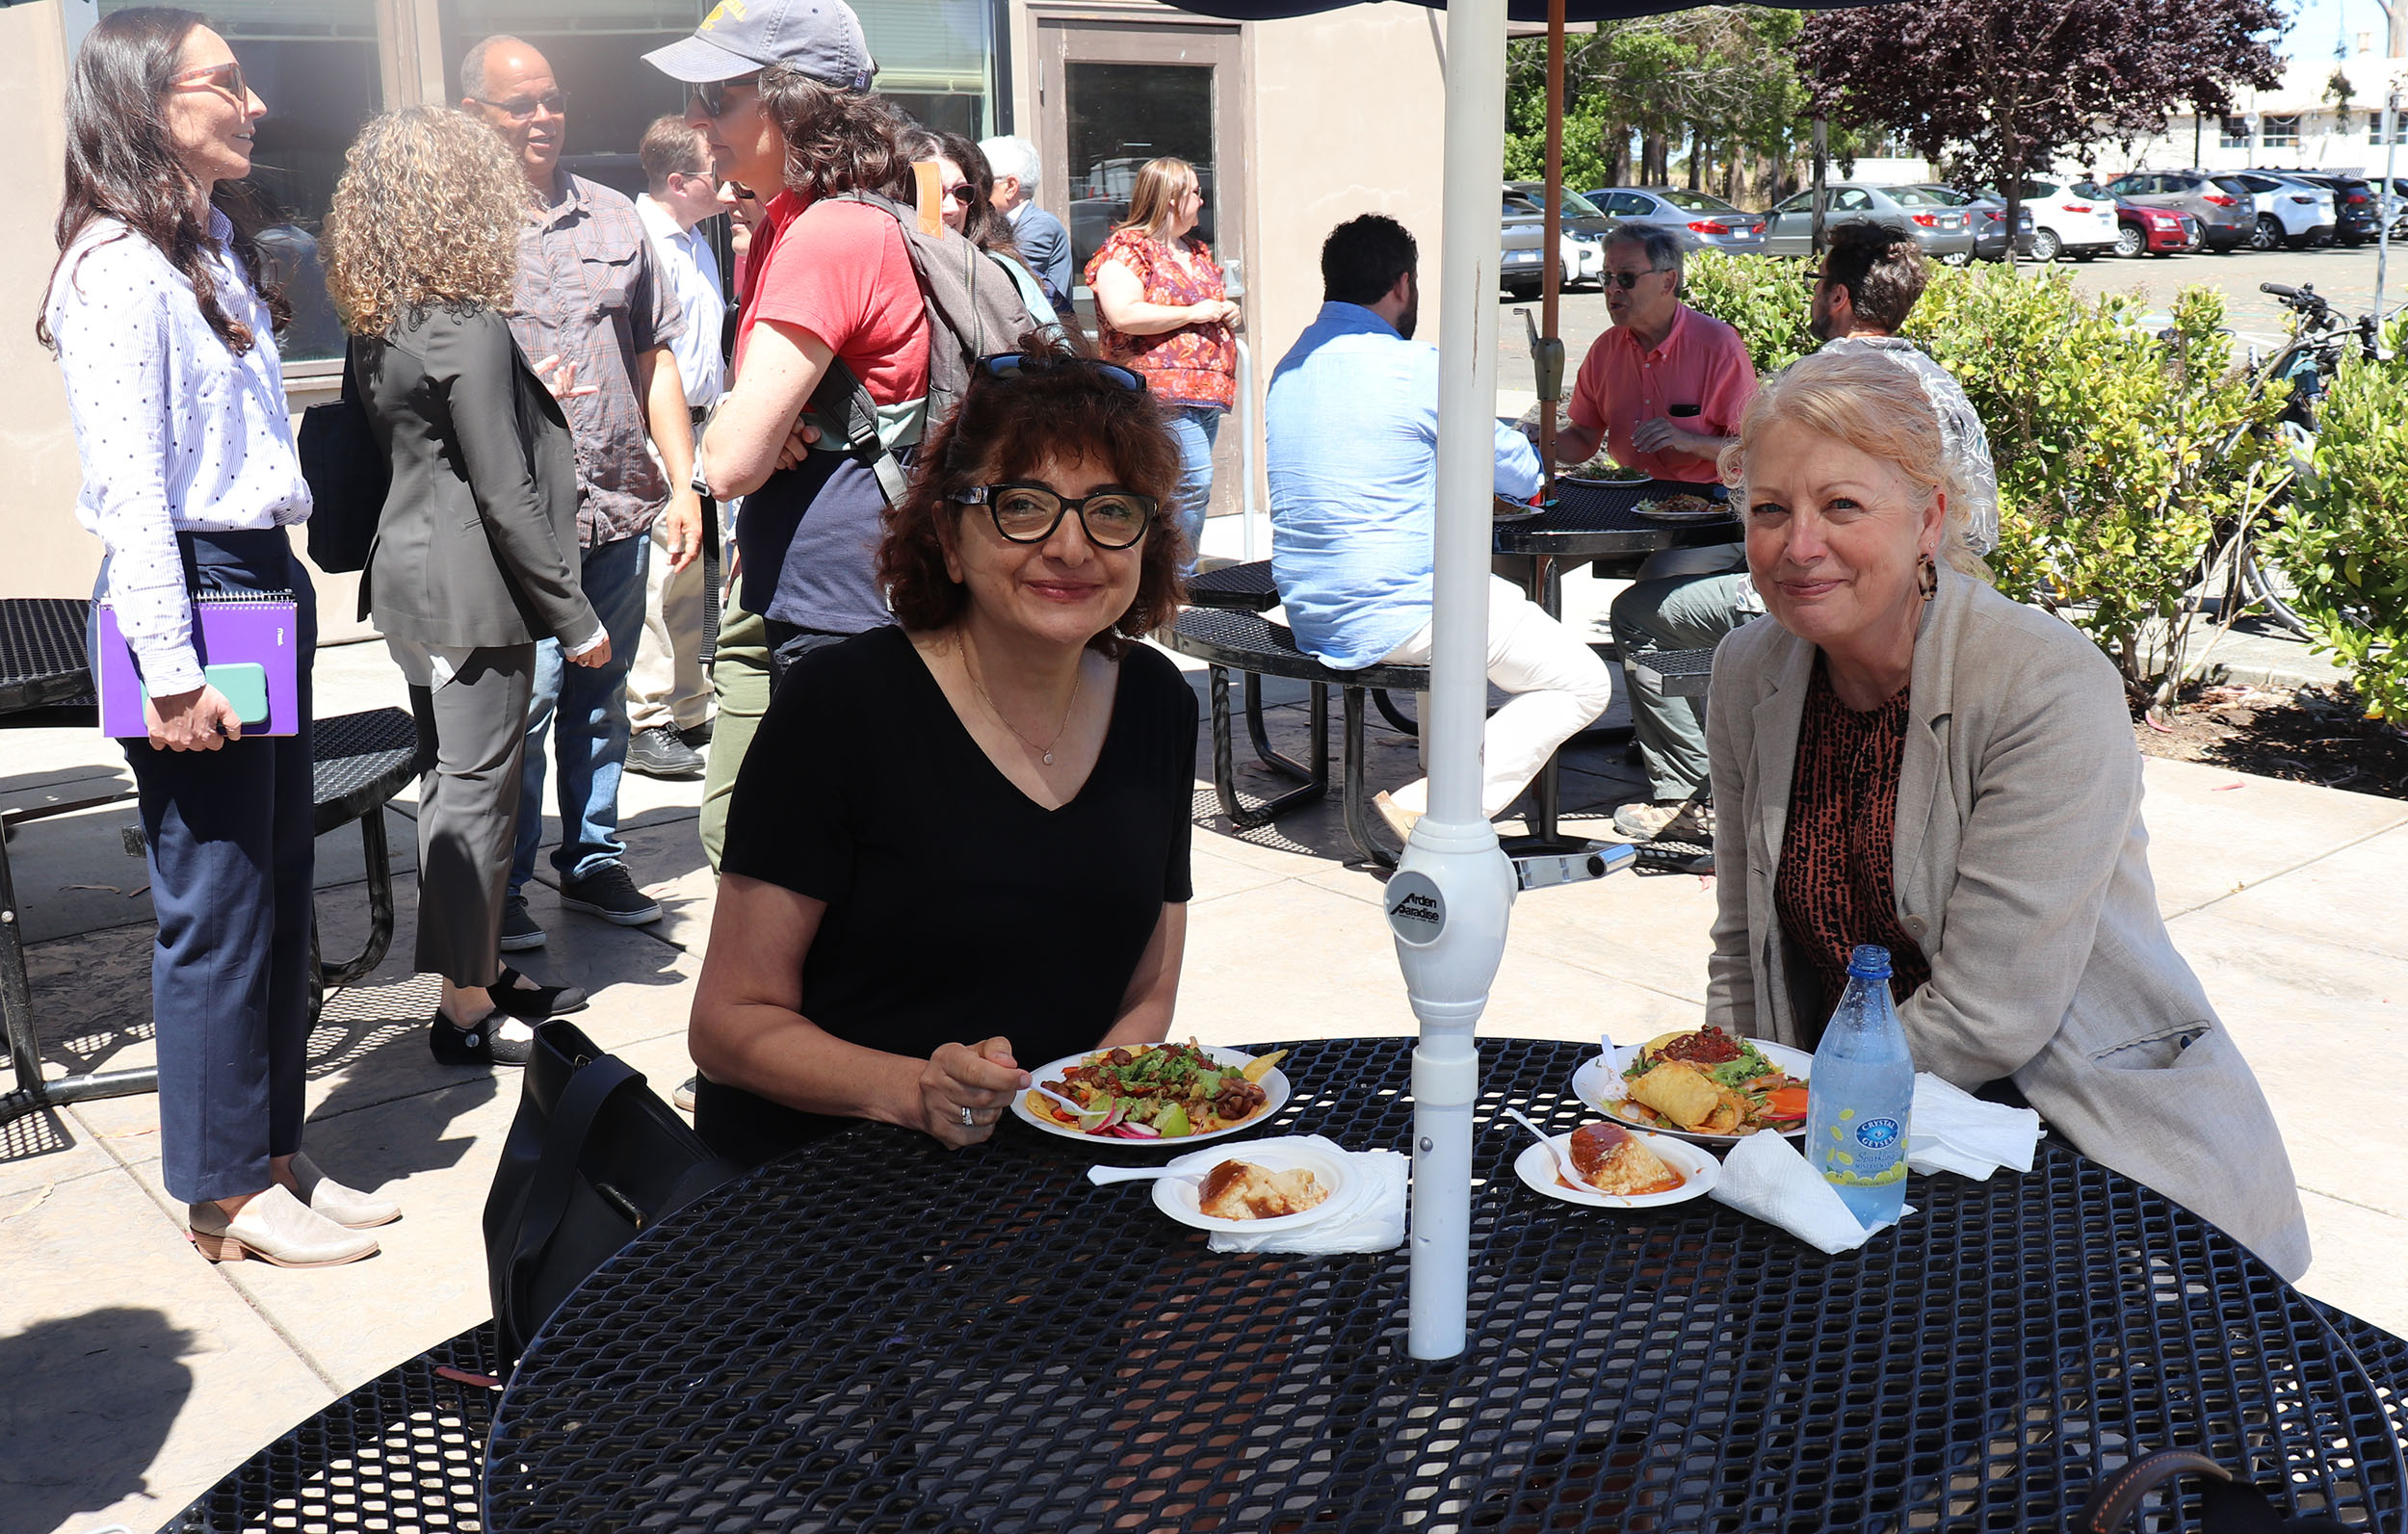 ITS Berkeley and Center staff came together to celebrate award winners with an end of summer lunch